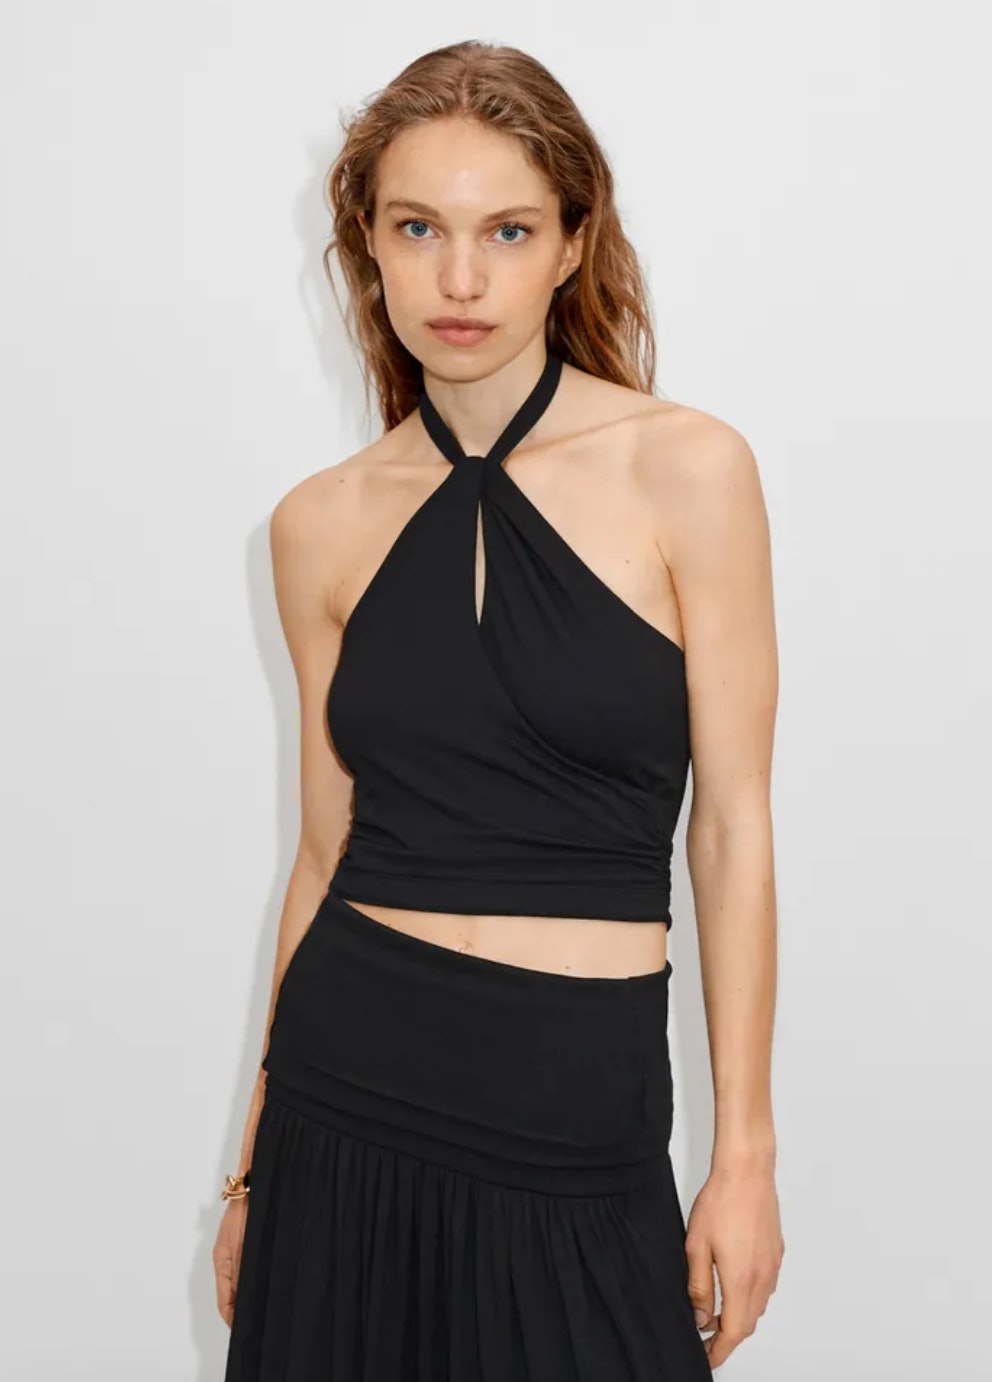 8 Halter Top Outfits That Showcase The Garment's Versatility